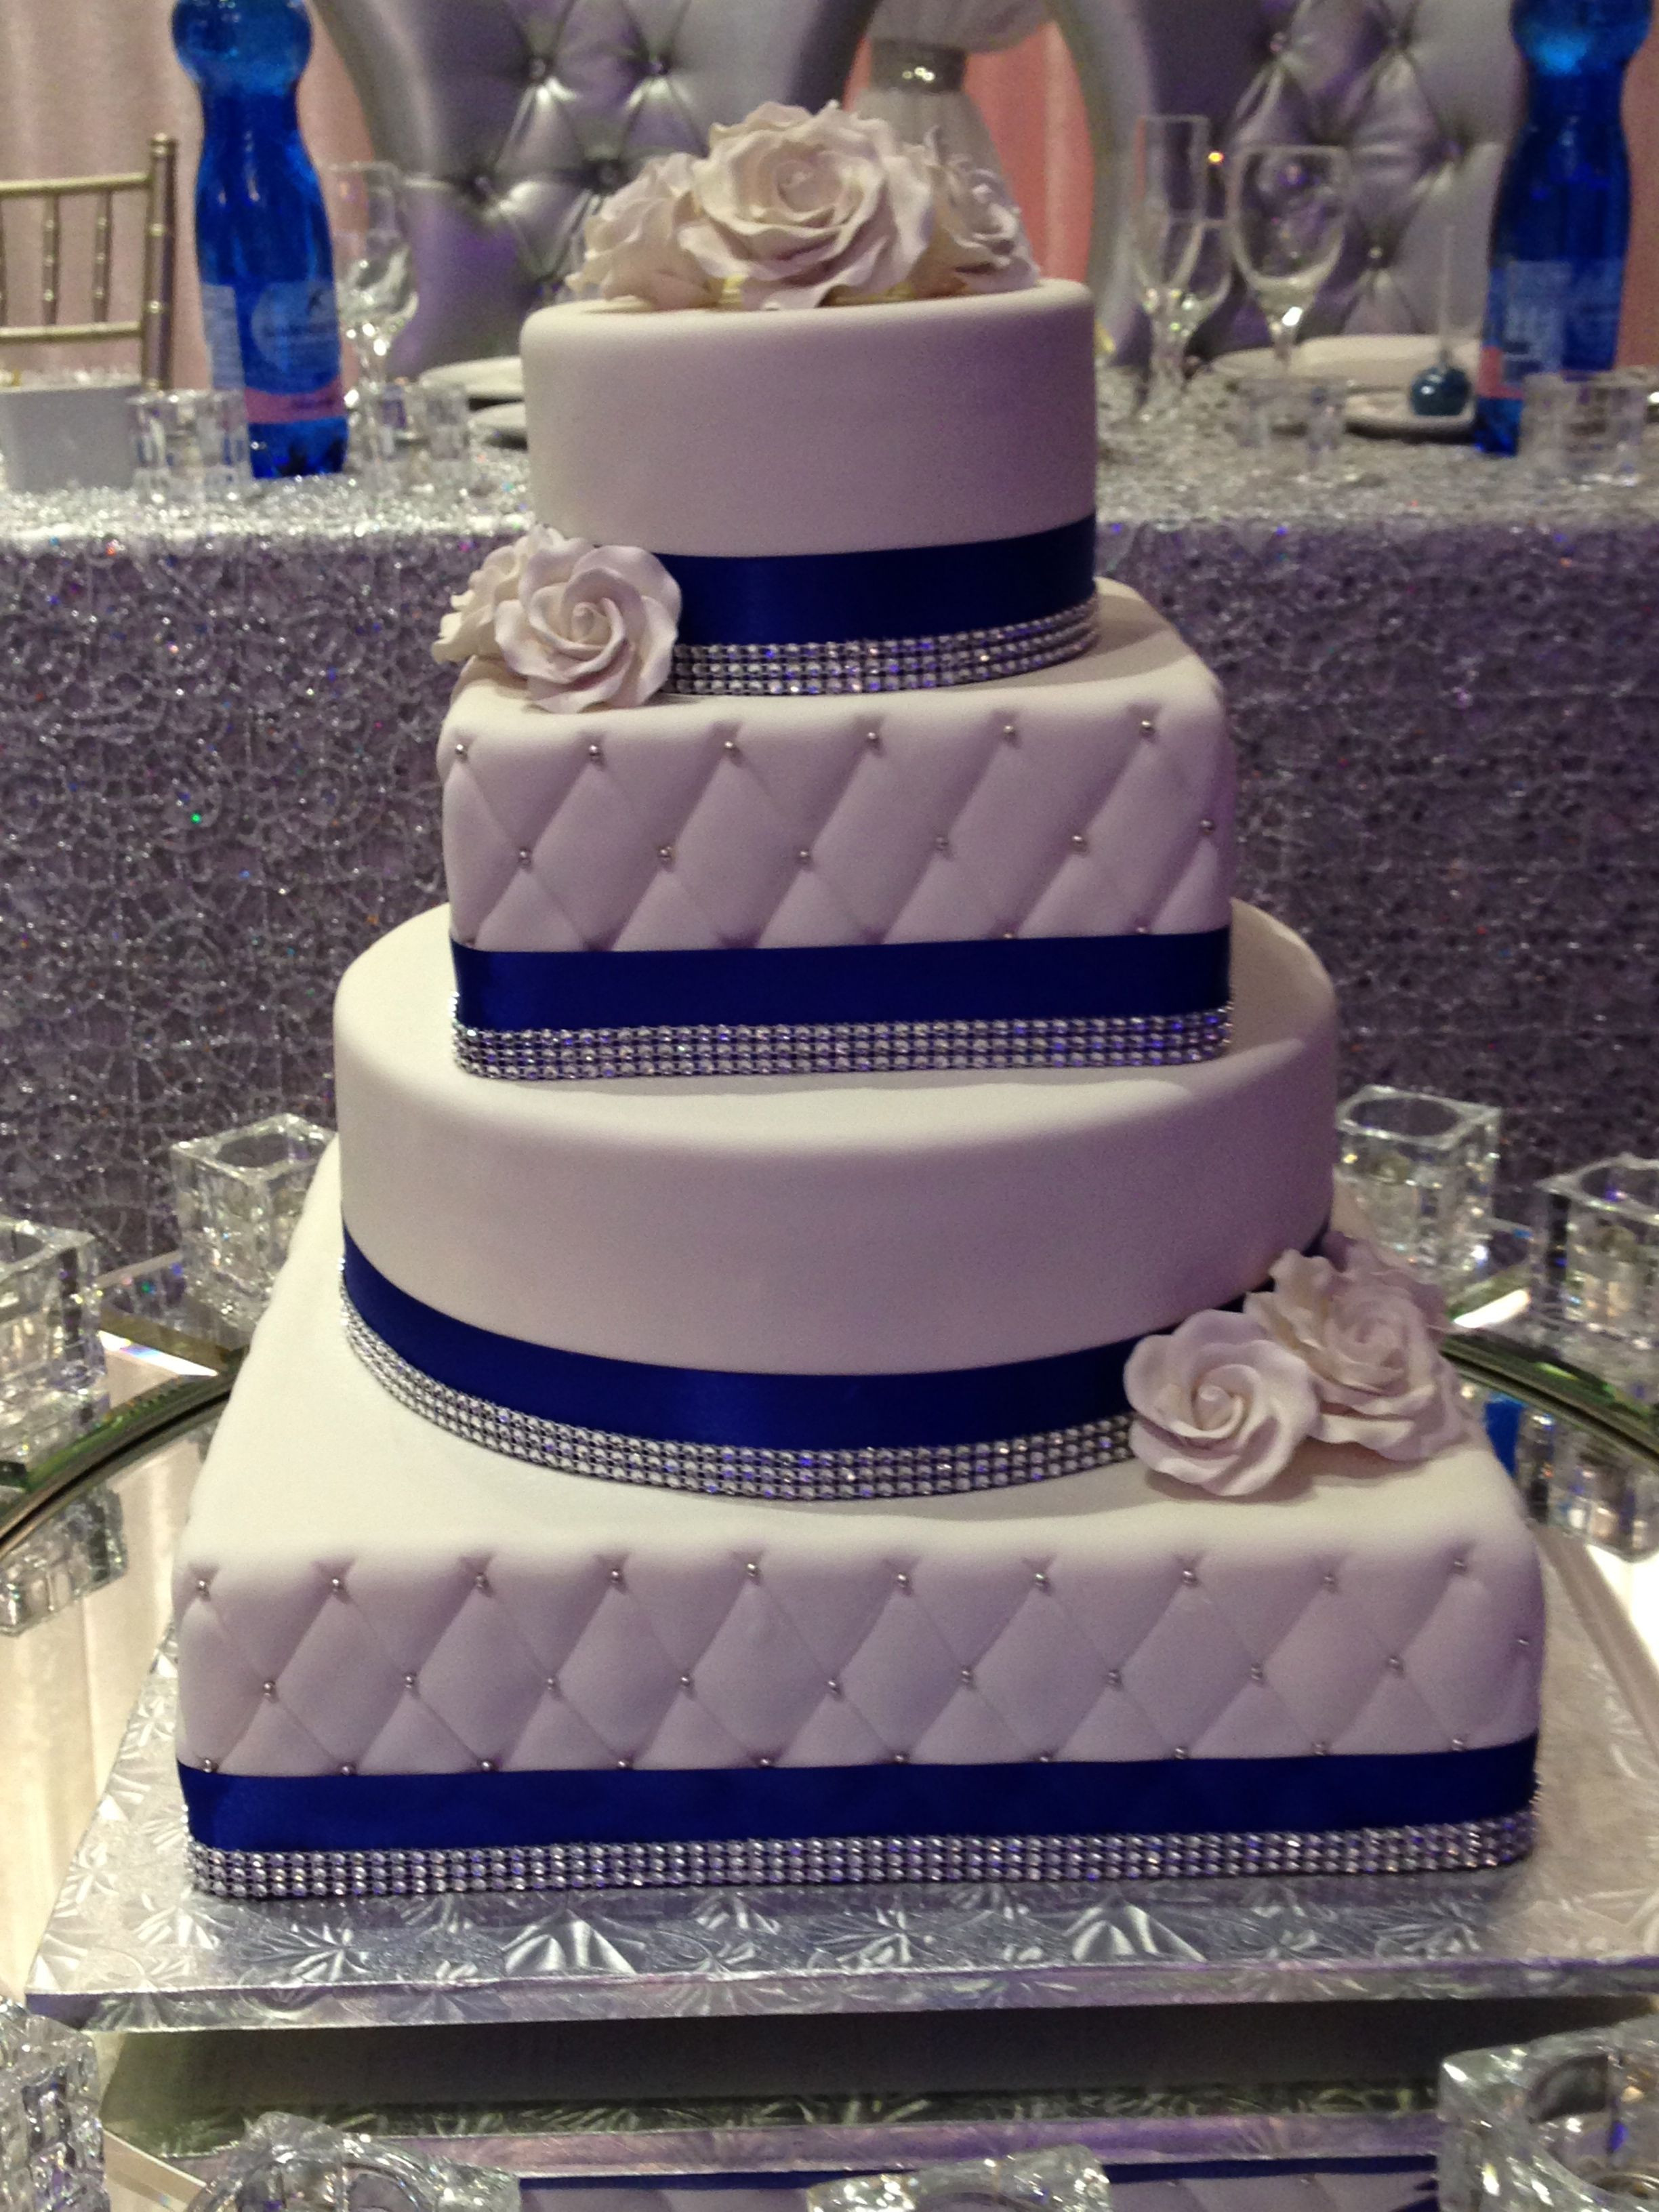 4 Tier Wedding Cakes
 Royal blue trimmed 4 tier round and square wedding cake